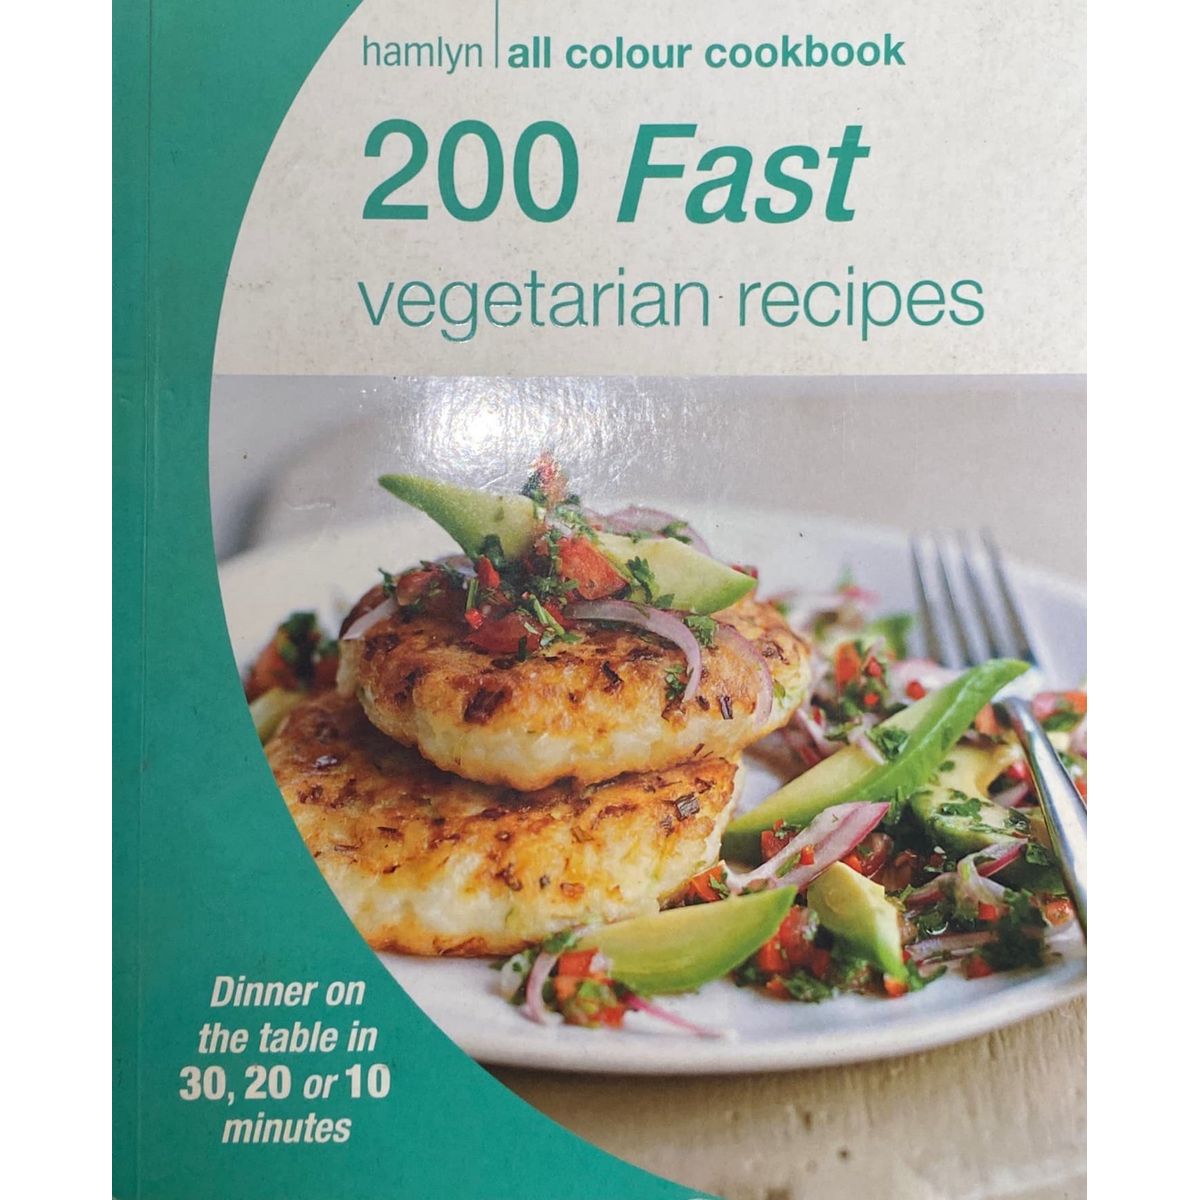 ISBN: 9780600629047 / 060062904X - 200 Fast Vegetarian Recipes: Dinner on the Table in 30, 20 or 10 Minutes by Leanne Bryan [2015]